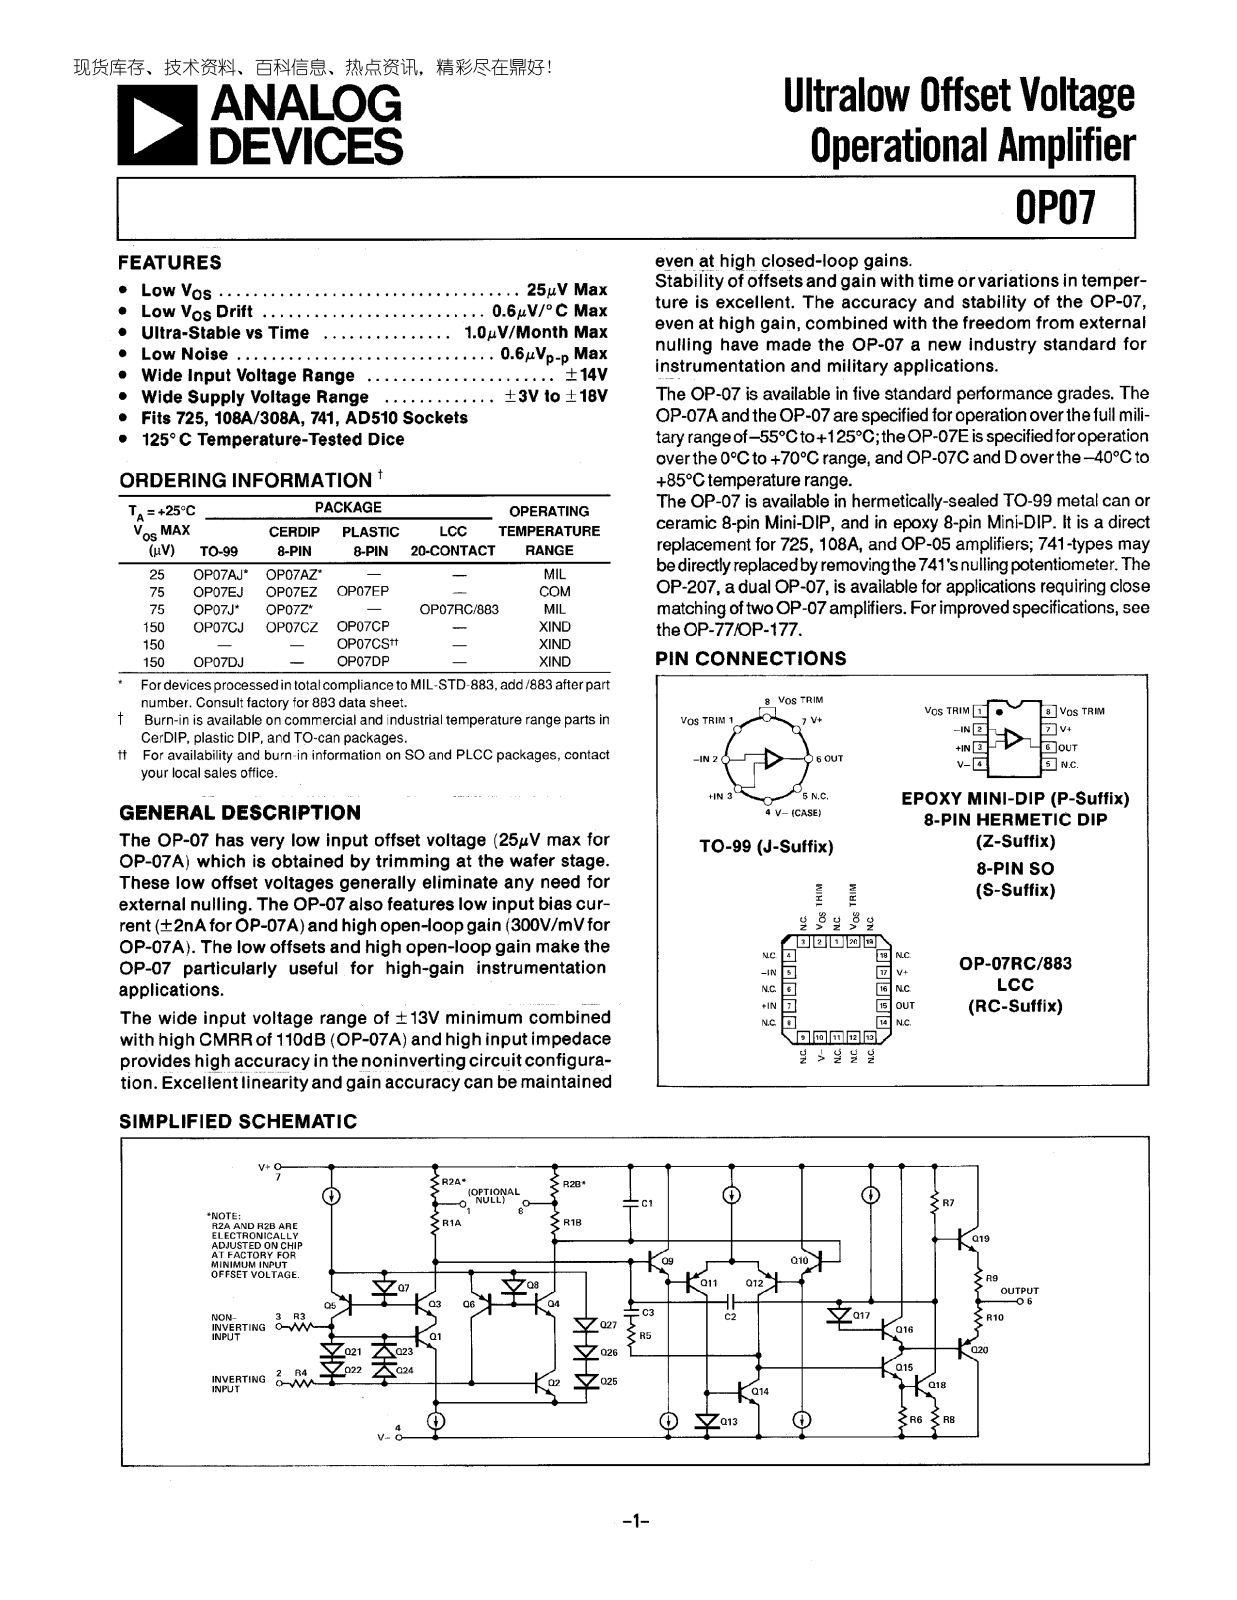 ANALOG DEVICES 0P07 Service Manual